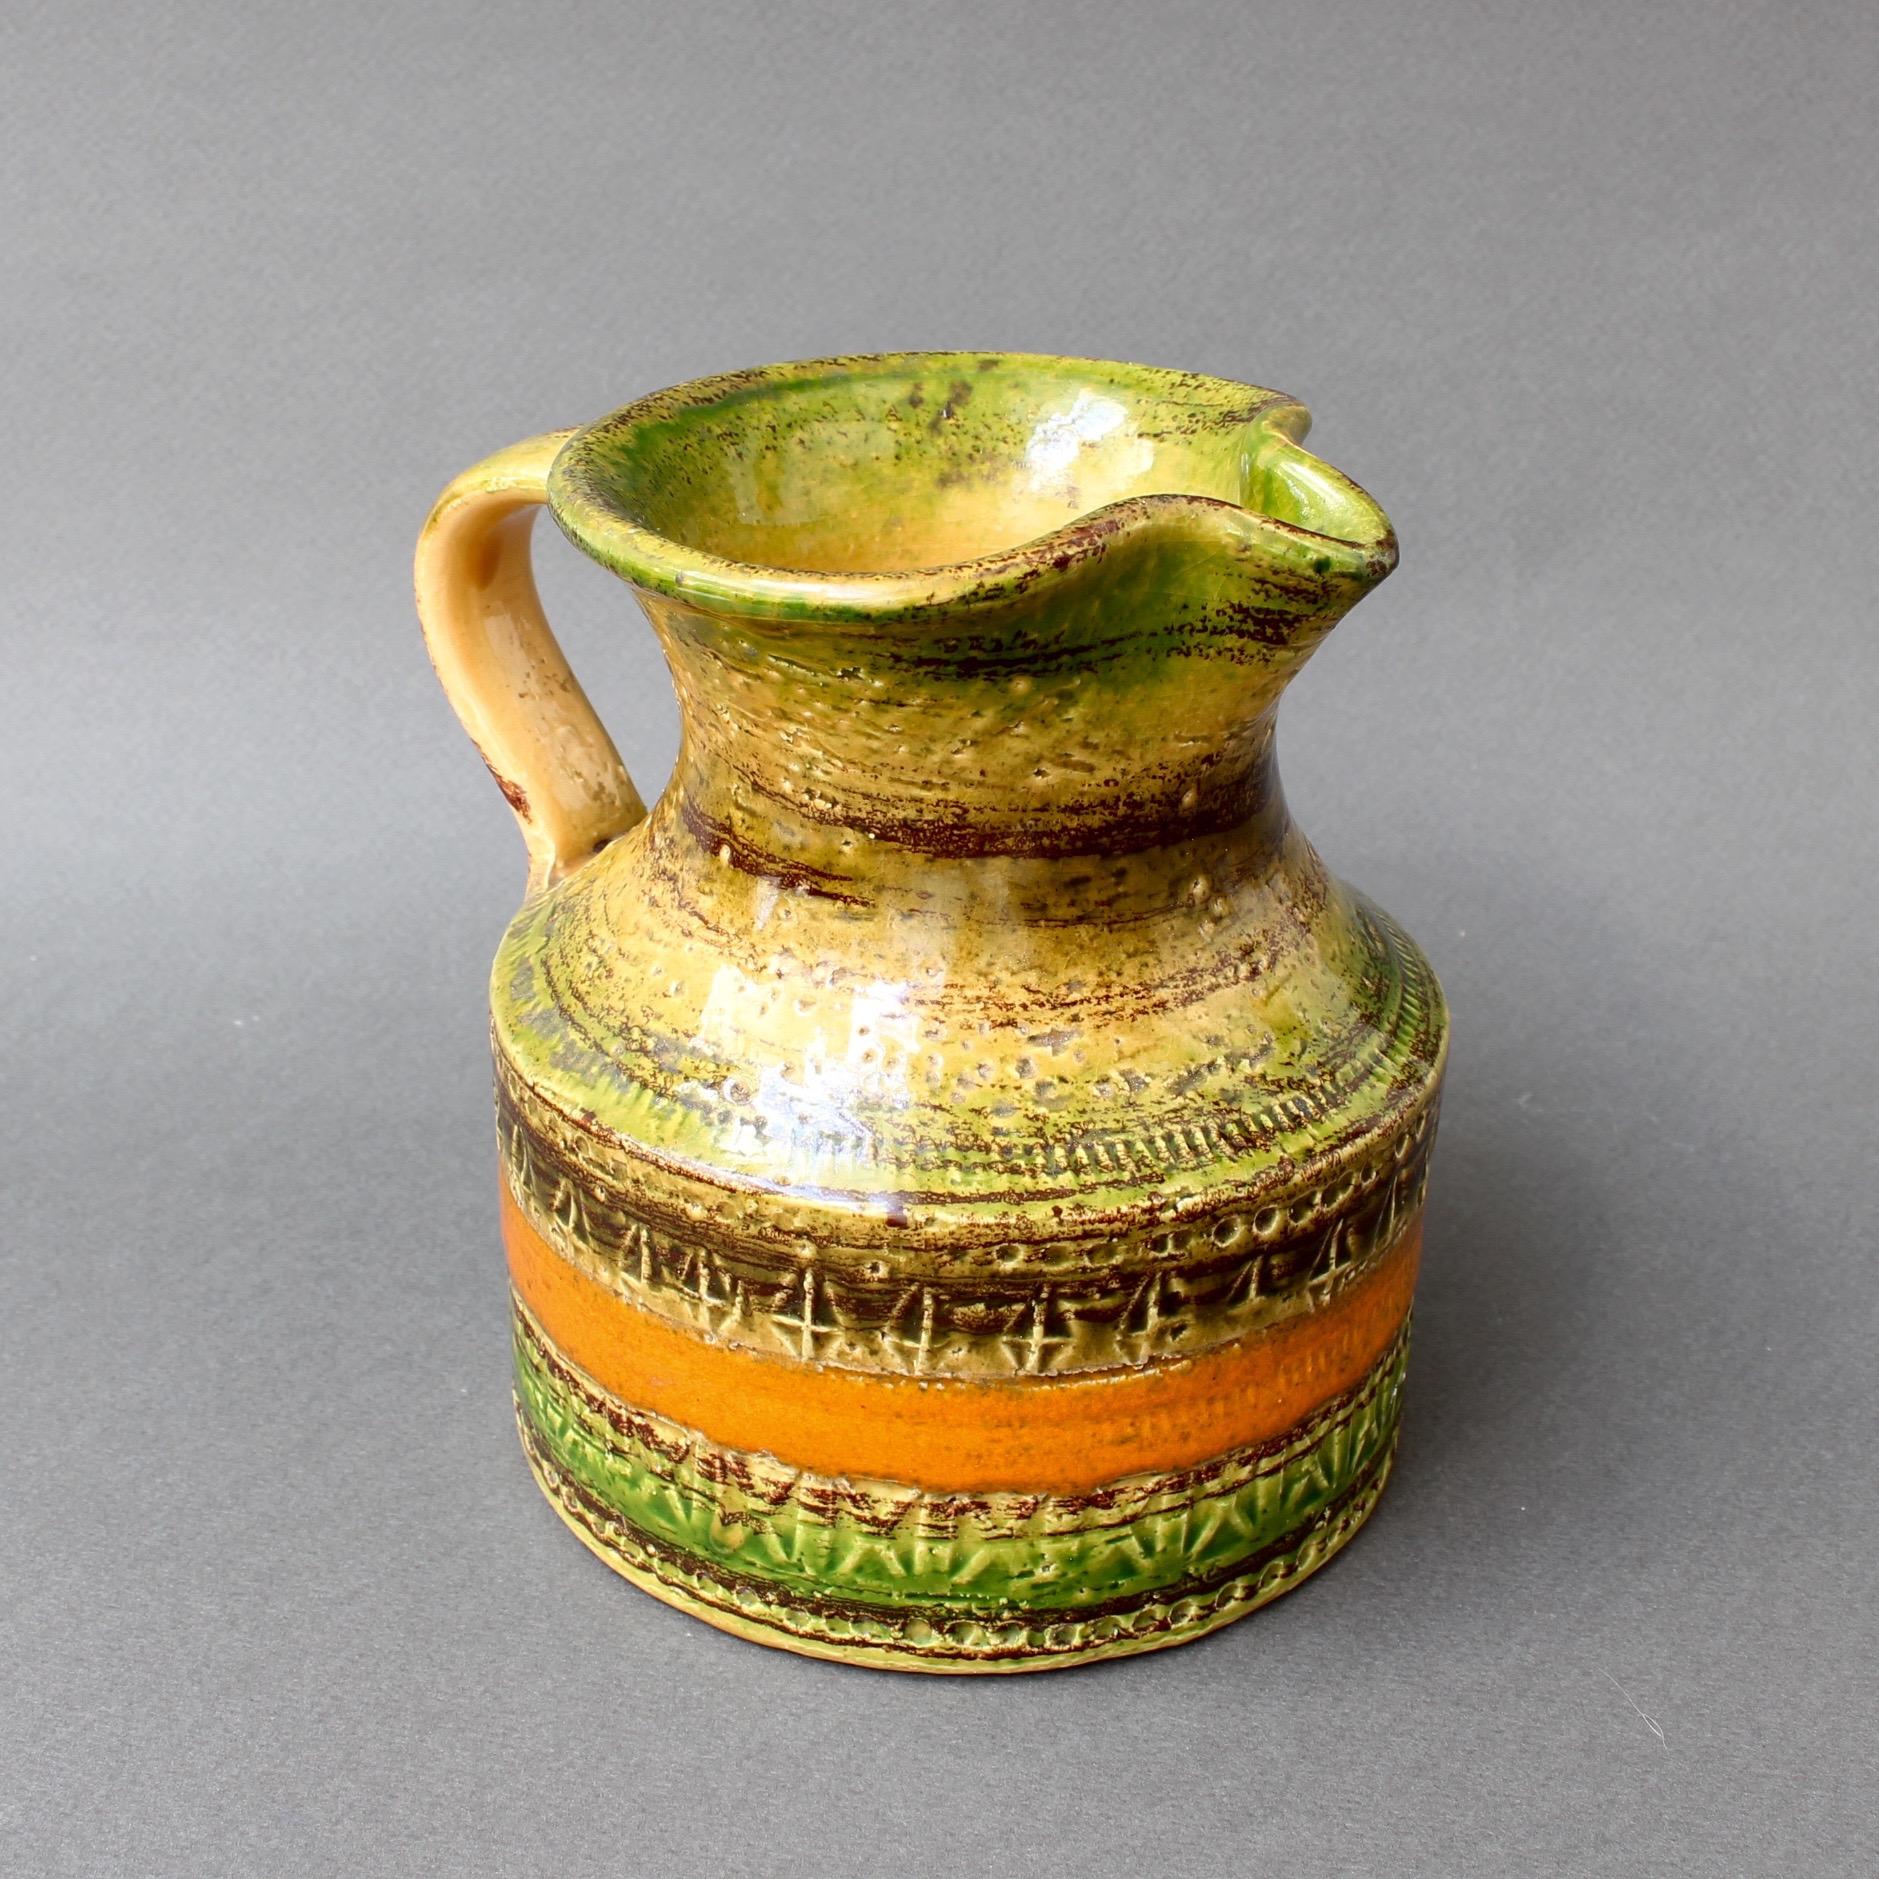 Midcentury decorative ceramic pitcher or carafe by Bitossi in avocado green with orange accents, (circa 1960s). A stout and sturdy design with loads of charm and character. A very attractive sheen has been applied to the variegated surface which